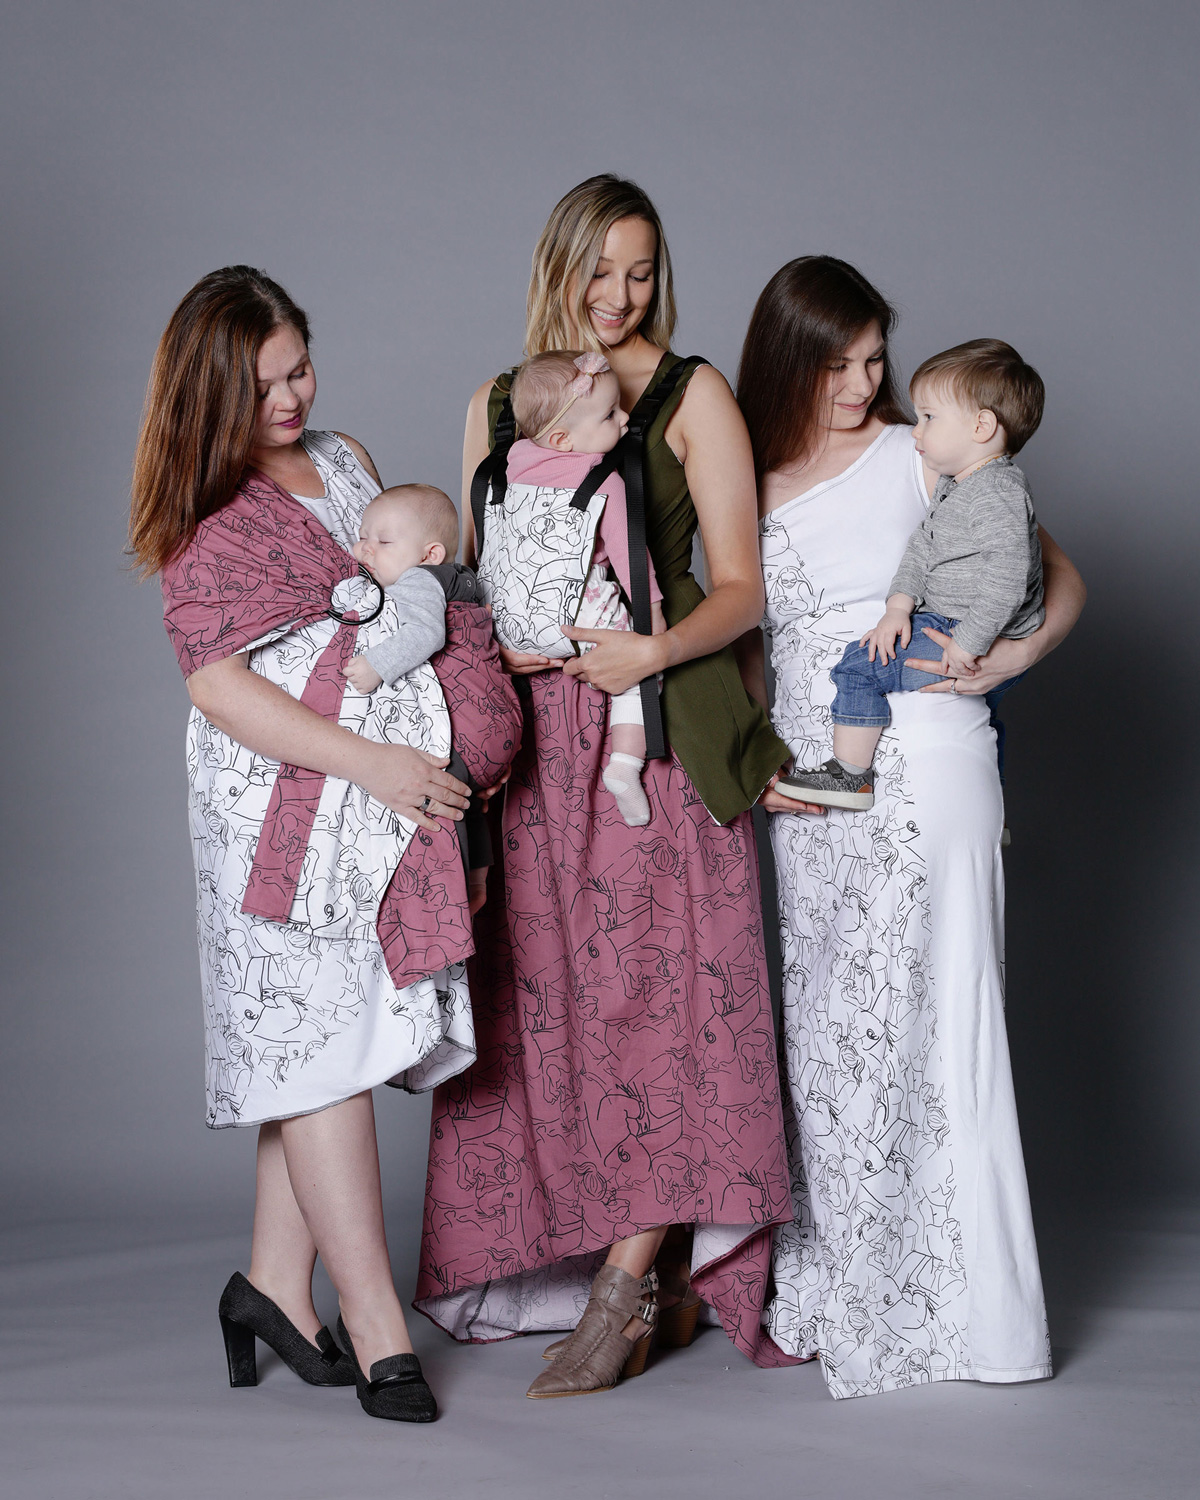 Three women each holding a baby. All are modeling JenLey Designs